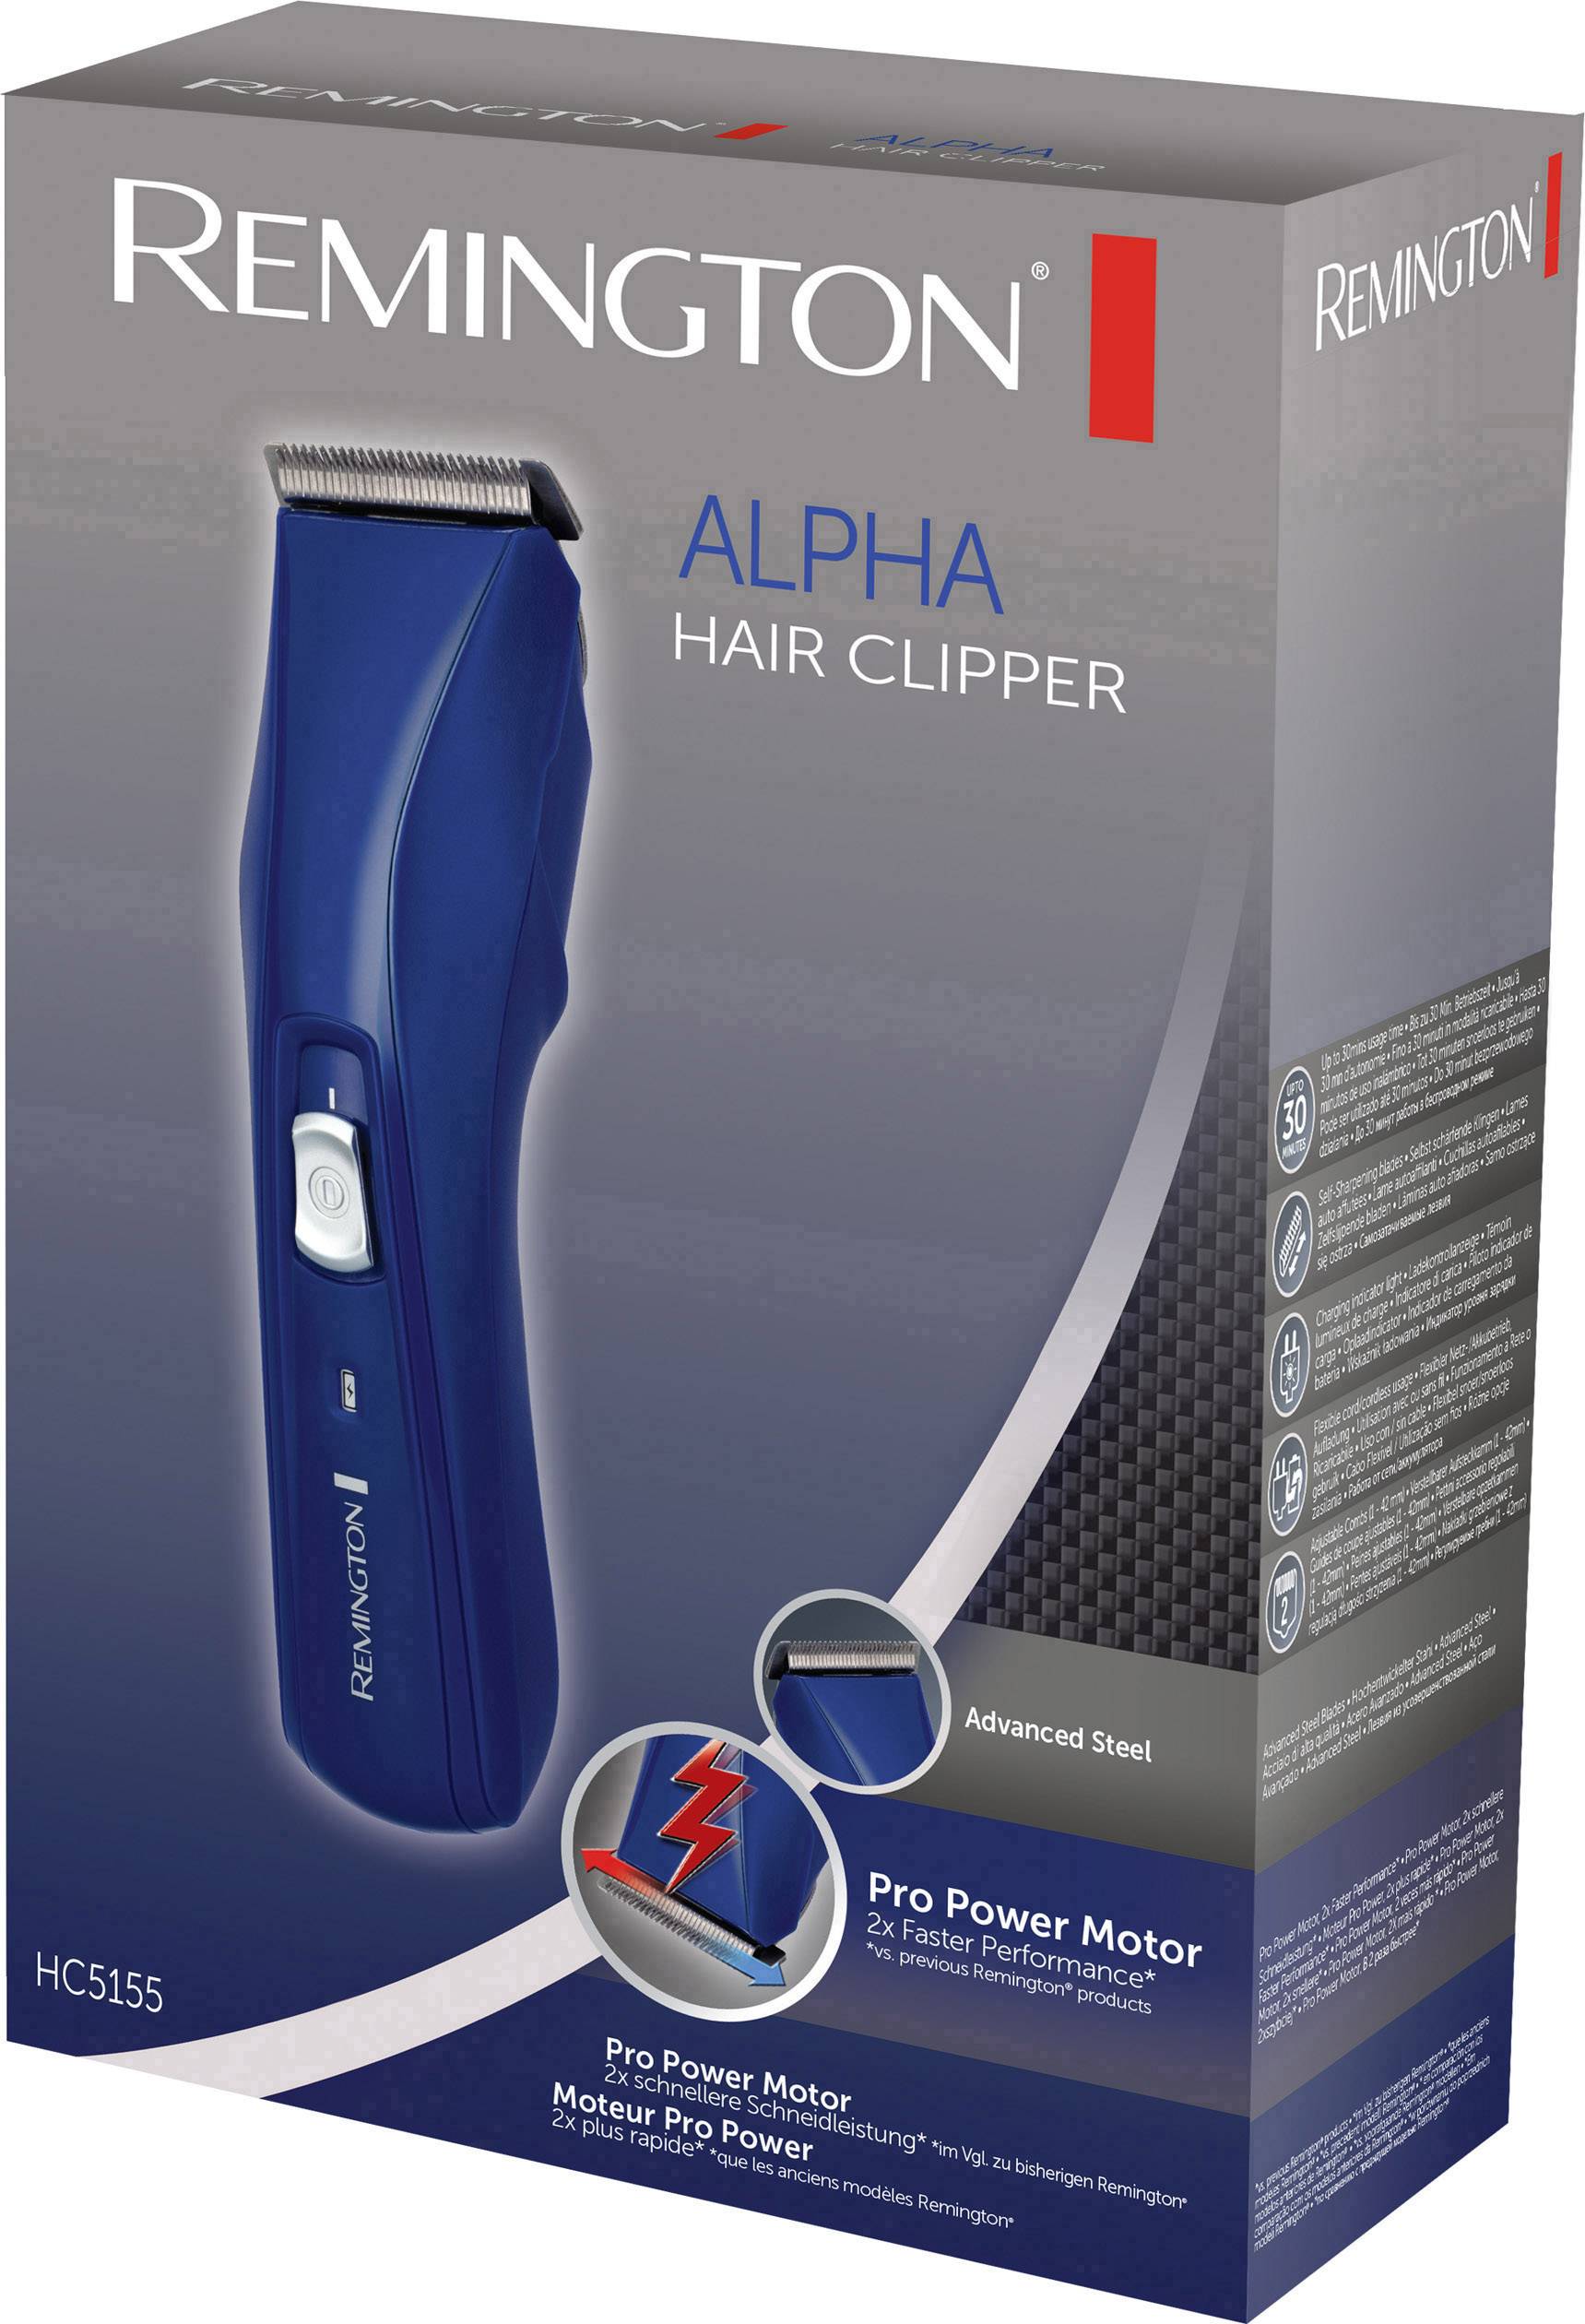 42mm hair clippers